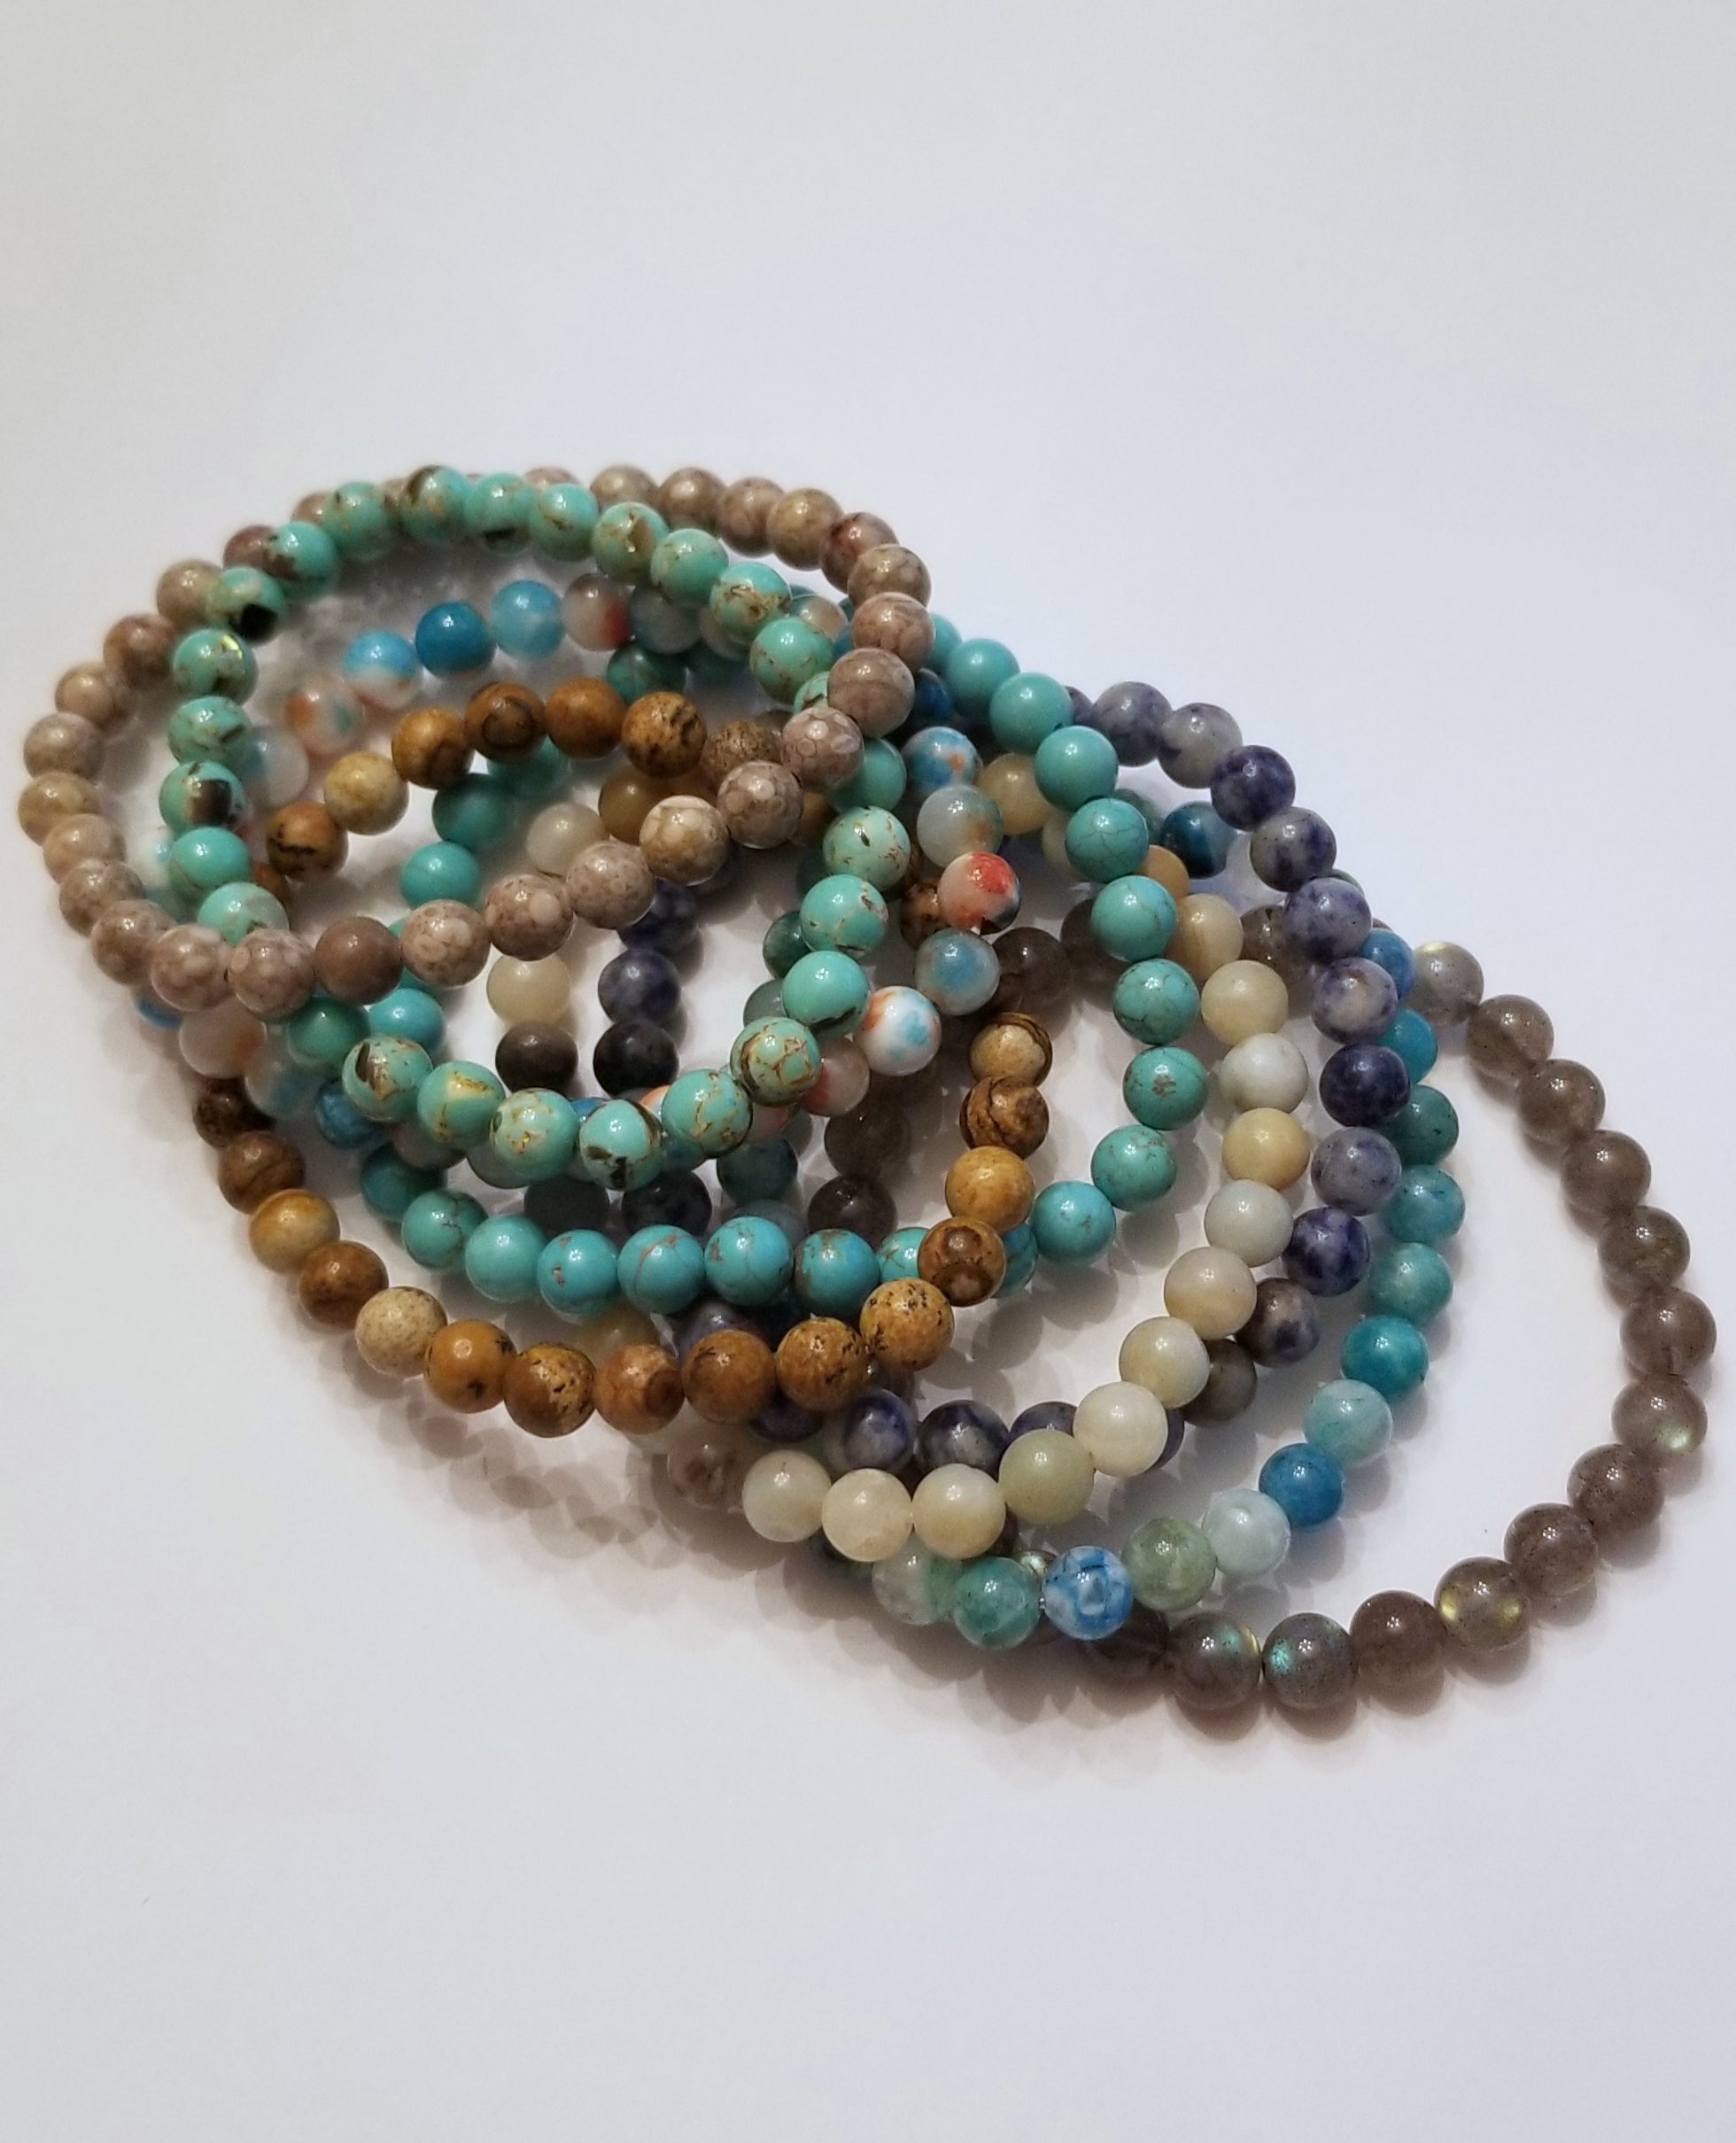 Colors of the Beach - Natural Stone Stretch Bracelets